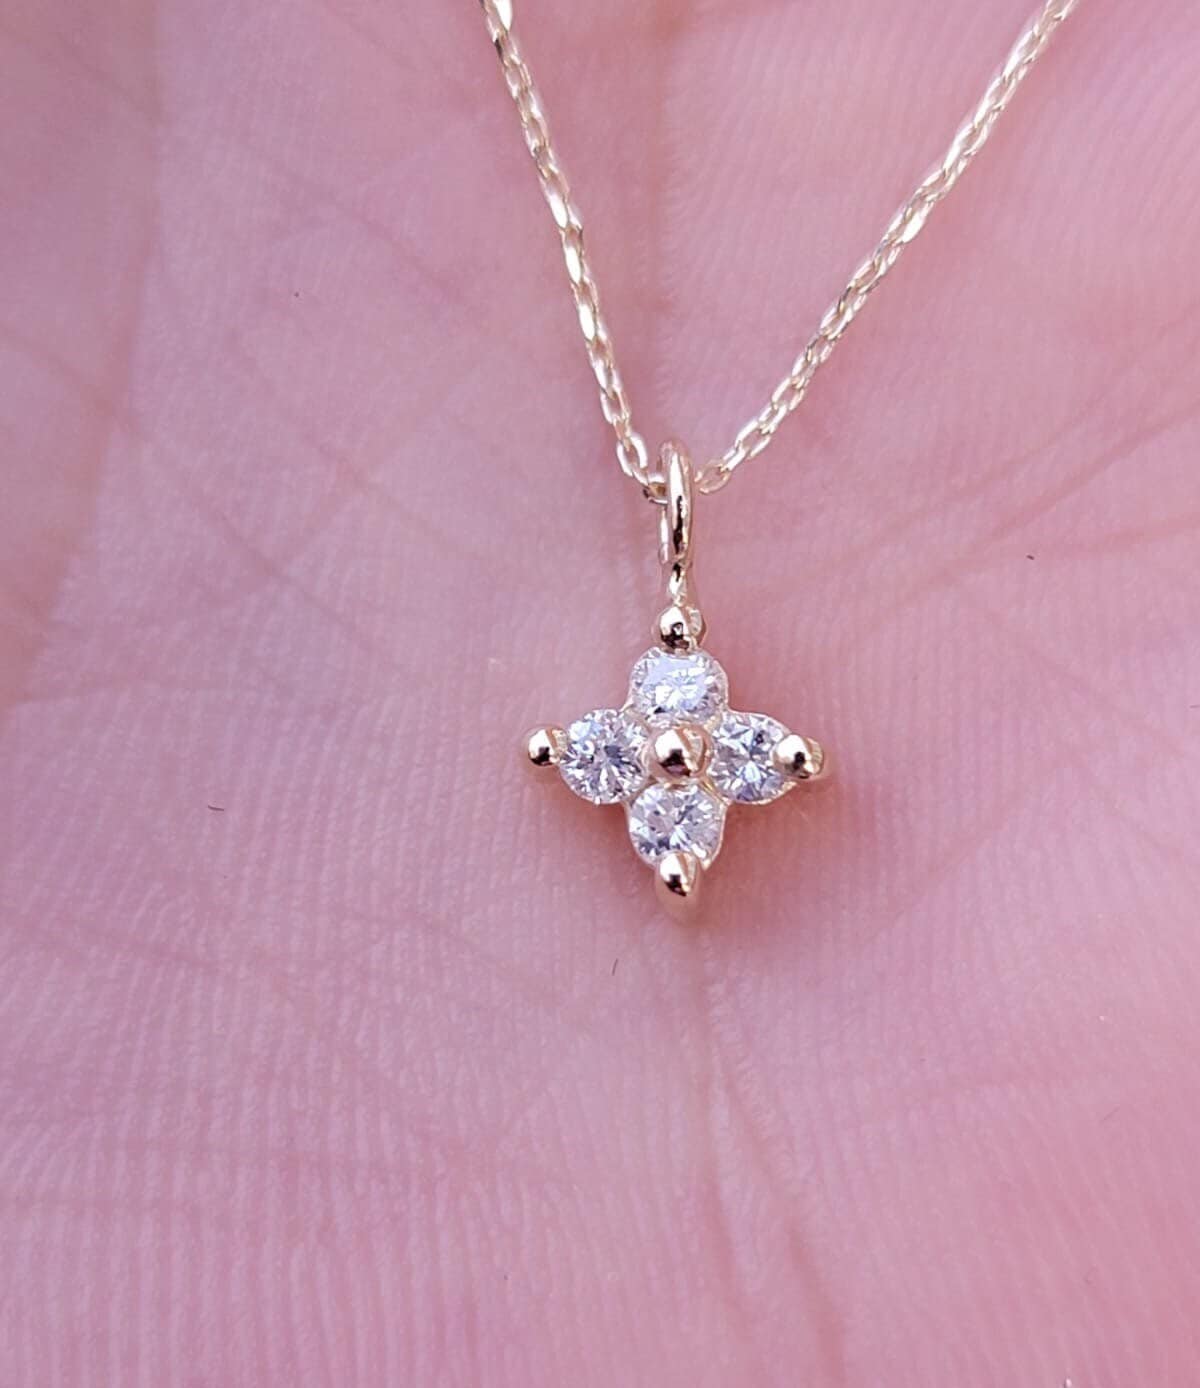 Diamond Clover Necklace in 14k Solid Gold, Good Luck Charm, Dainty Sparkling Chain, Natural Diamond Flower Cluster Chain, White Gold pendant